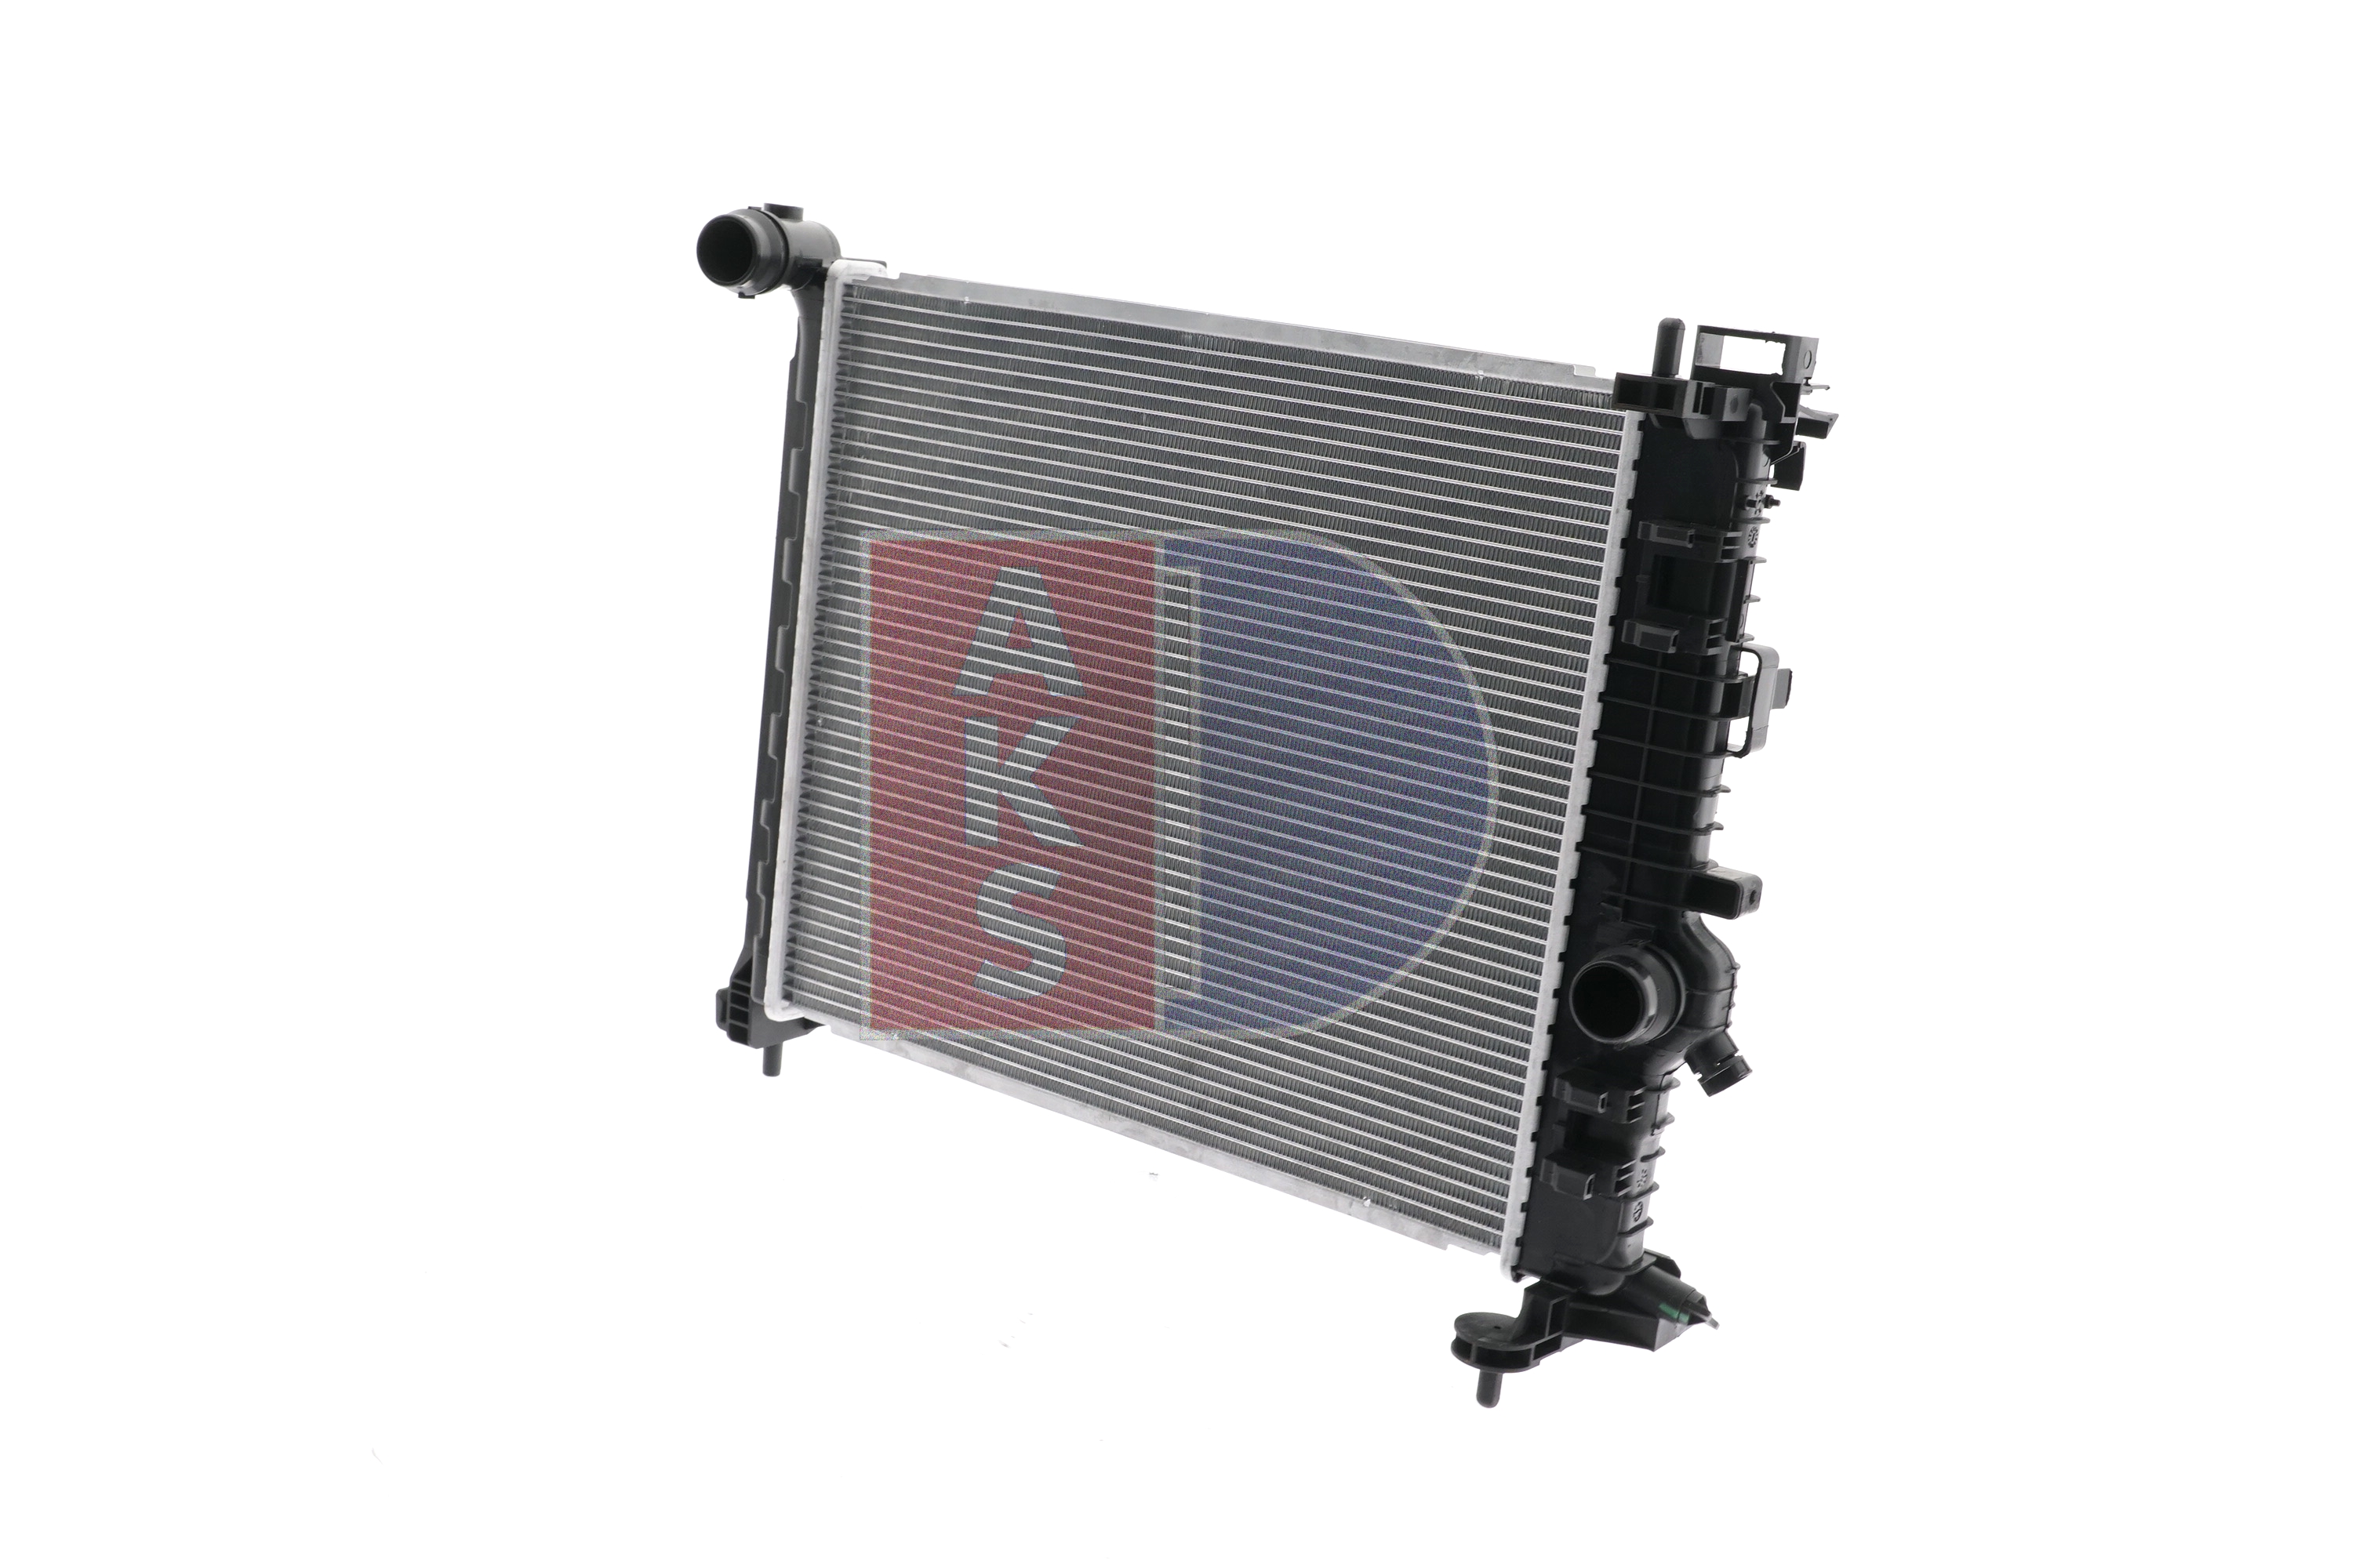 AKS DASIS 150108N Engine radiator Aluminium, for vehicles with/without air conditioning, 470 x 428 x 26 mm, Manual Transmission, Brazed cooling fins